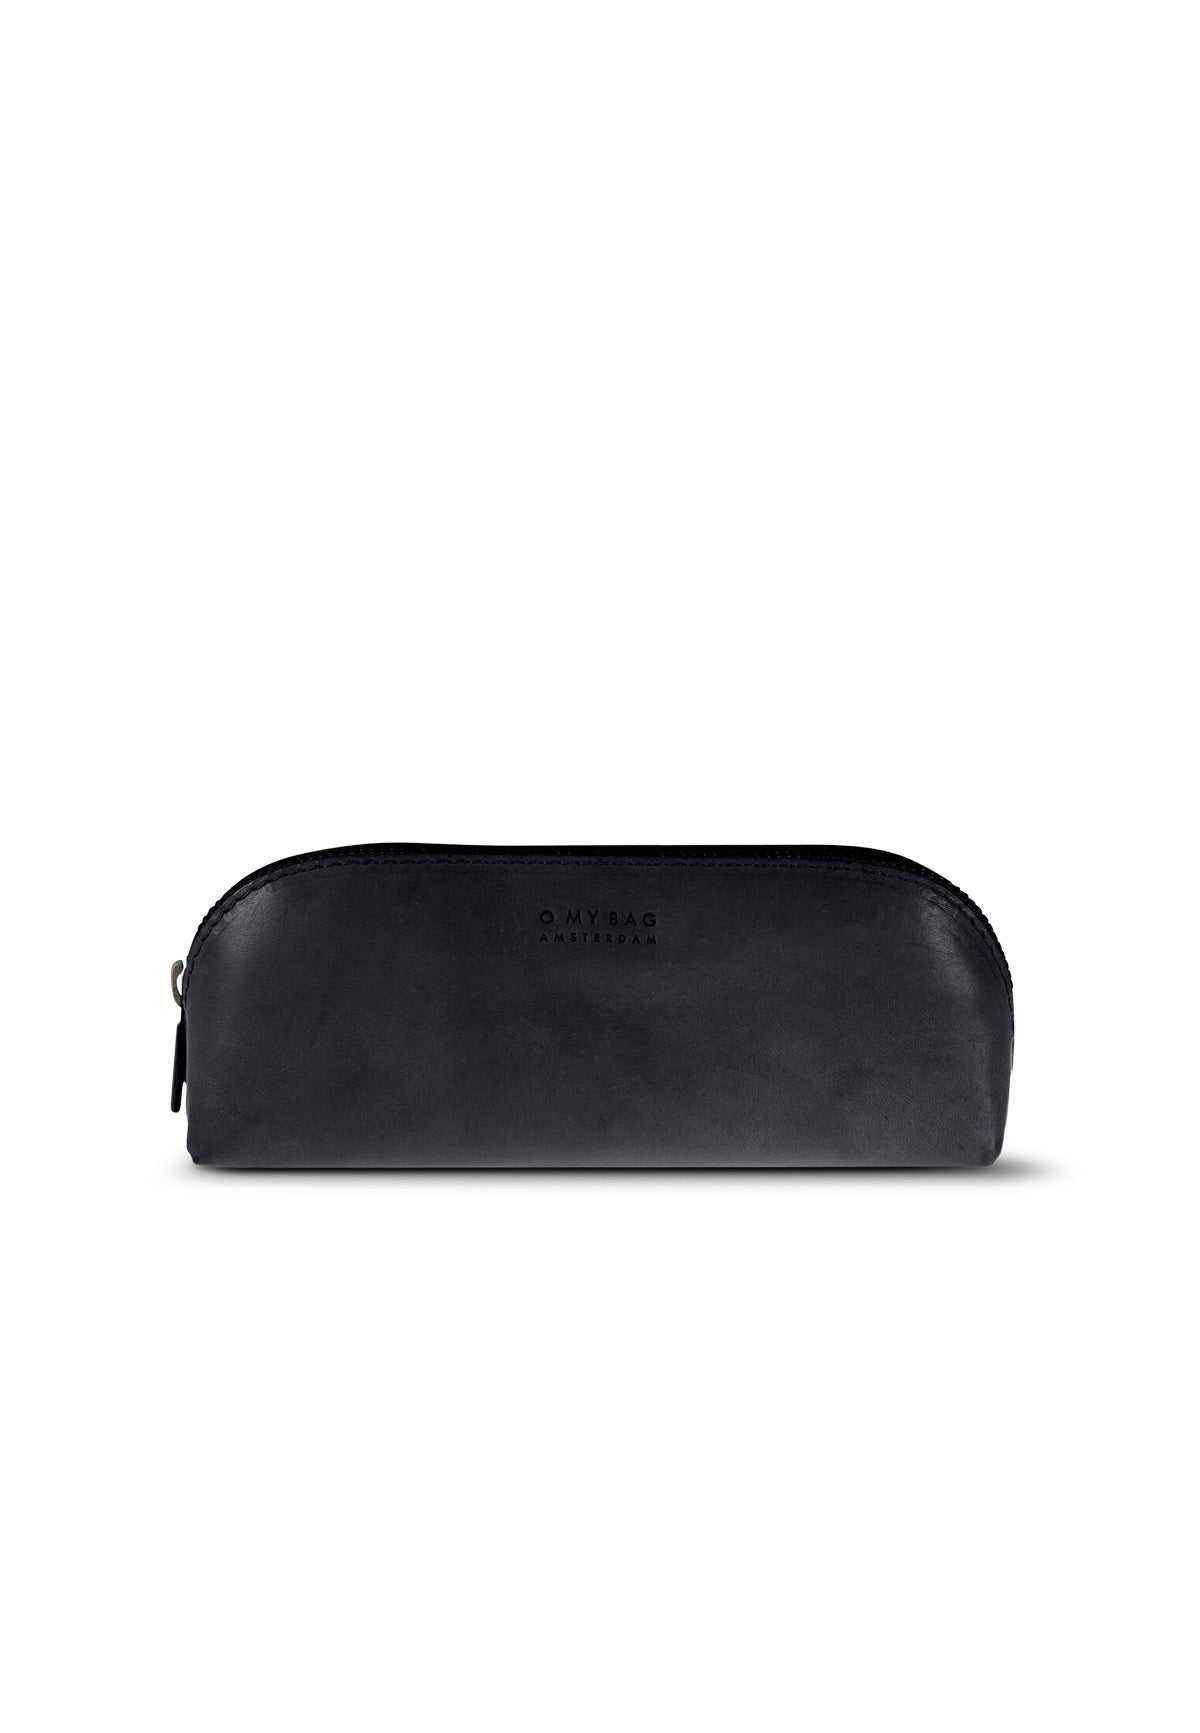 PENCIL CASE LARGE NATURAL CLASSIC LEATHER